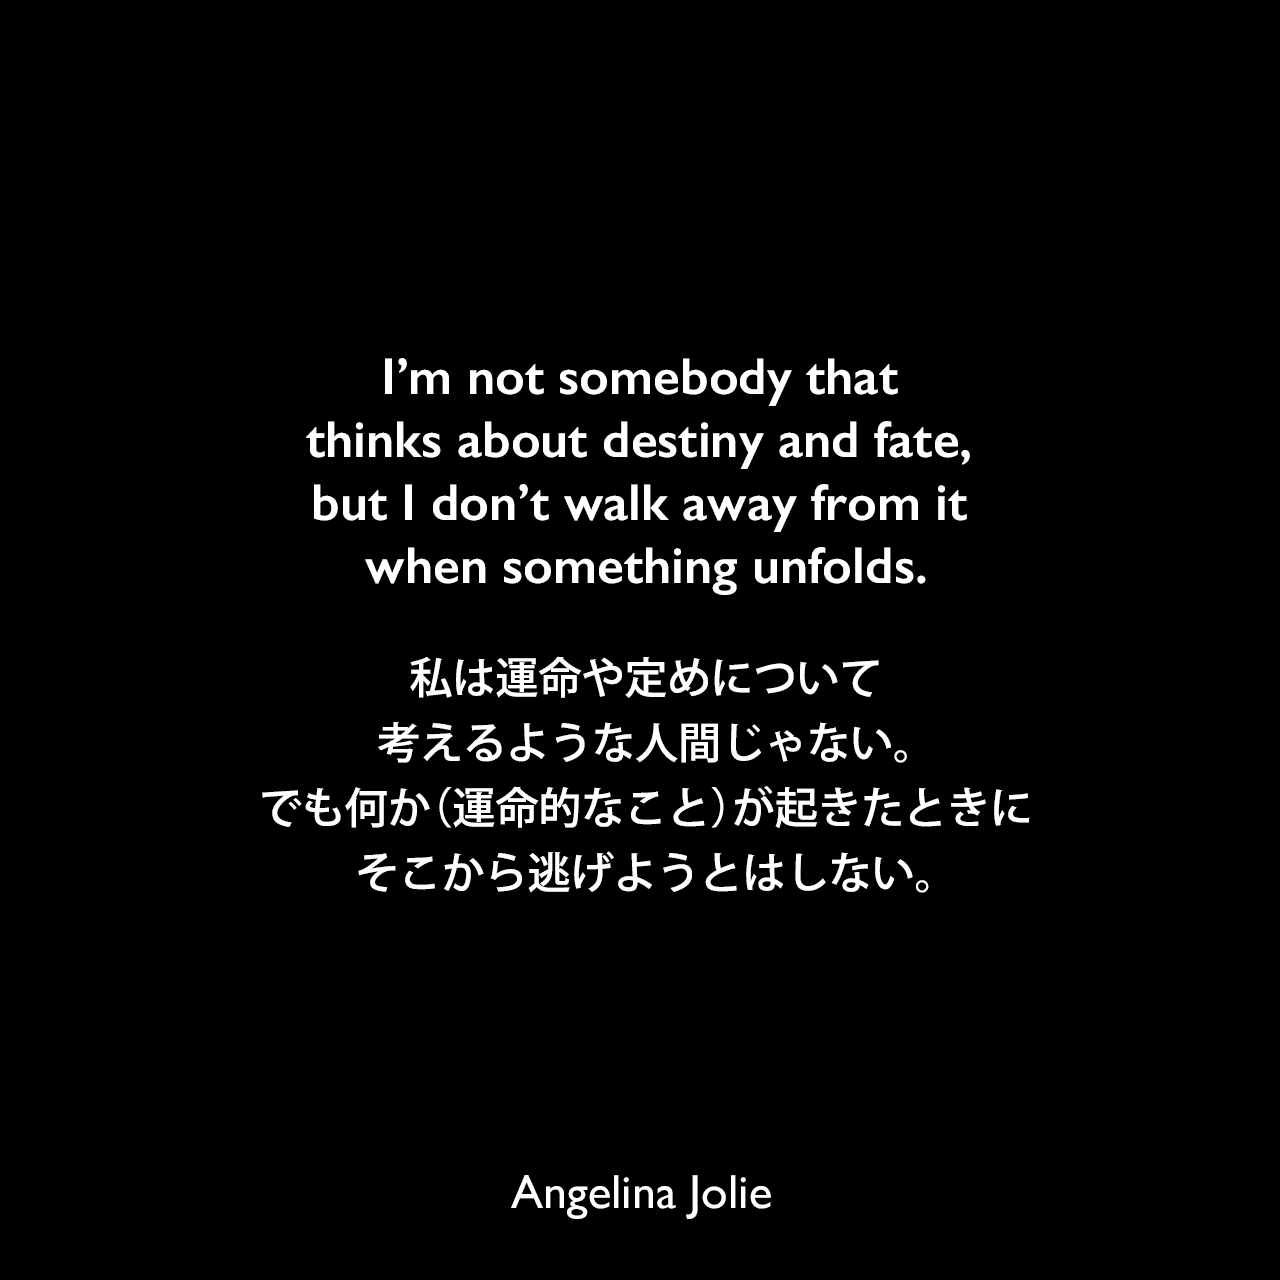 I’m not somebody that thinks about destiny and fate, but I don’t walk away from it when something unfolds.私は運命や定めについて考えるような人間じゃない。でも何か（運命的なこと）が起きたときにそこから逃げようとはしない。Angelina Jolie